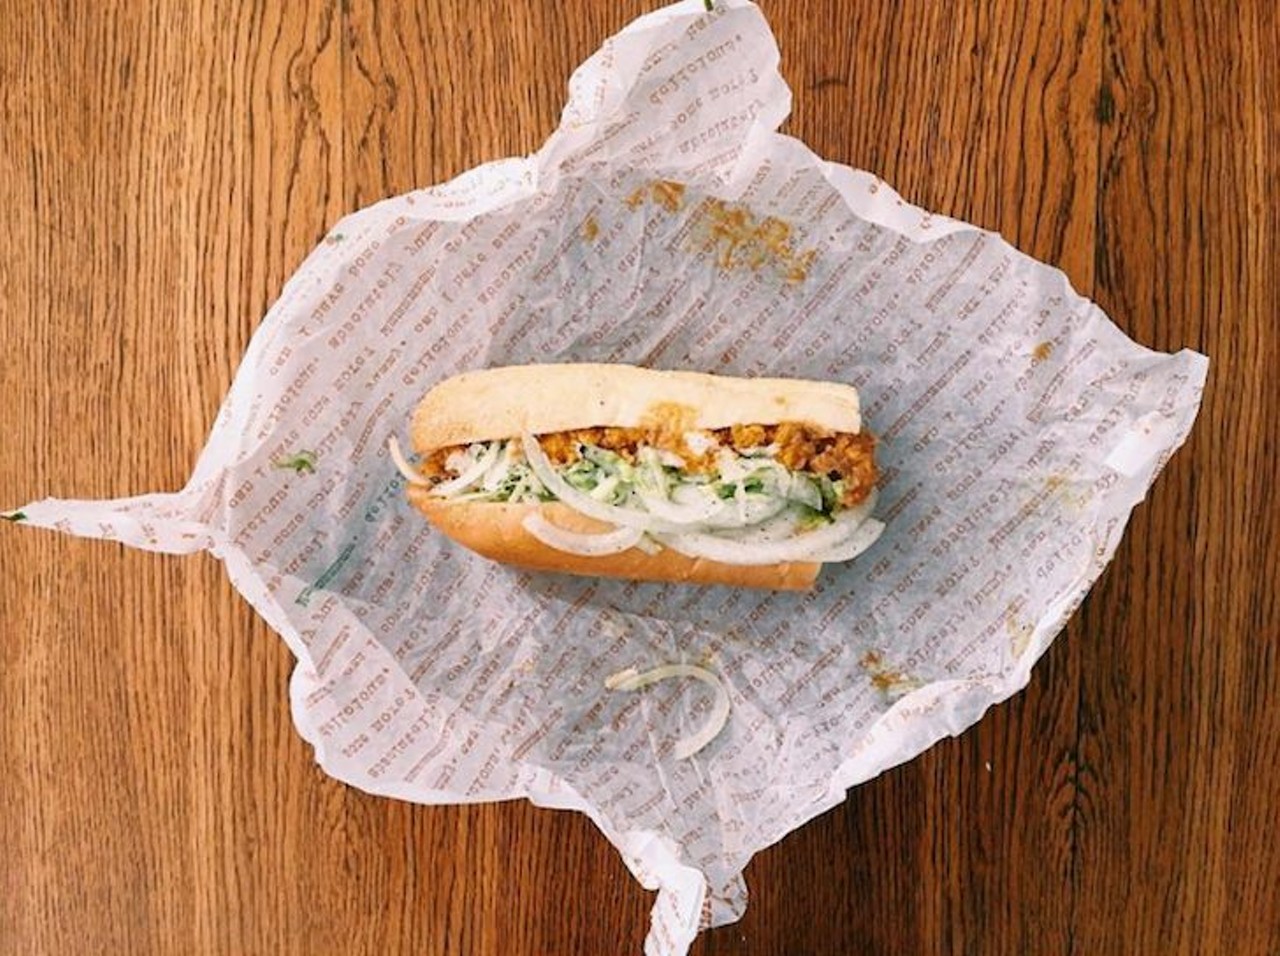 Always get your chicken tendies tossed
Chicken tender subs are a fan favorite, but you might not have know that you can get your chicken tenders tossed in any sauce of your choice for no extra charge. It's a game changer.
Photo via rendiohead/instagram